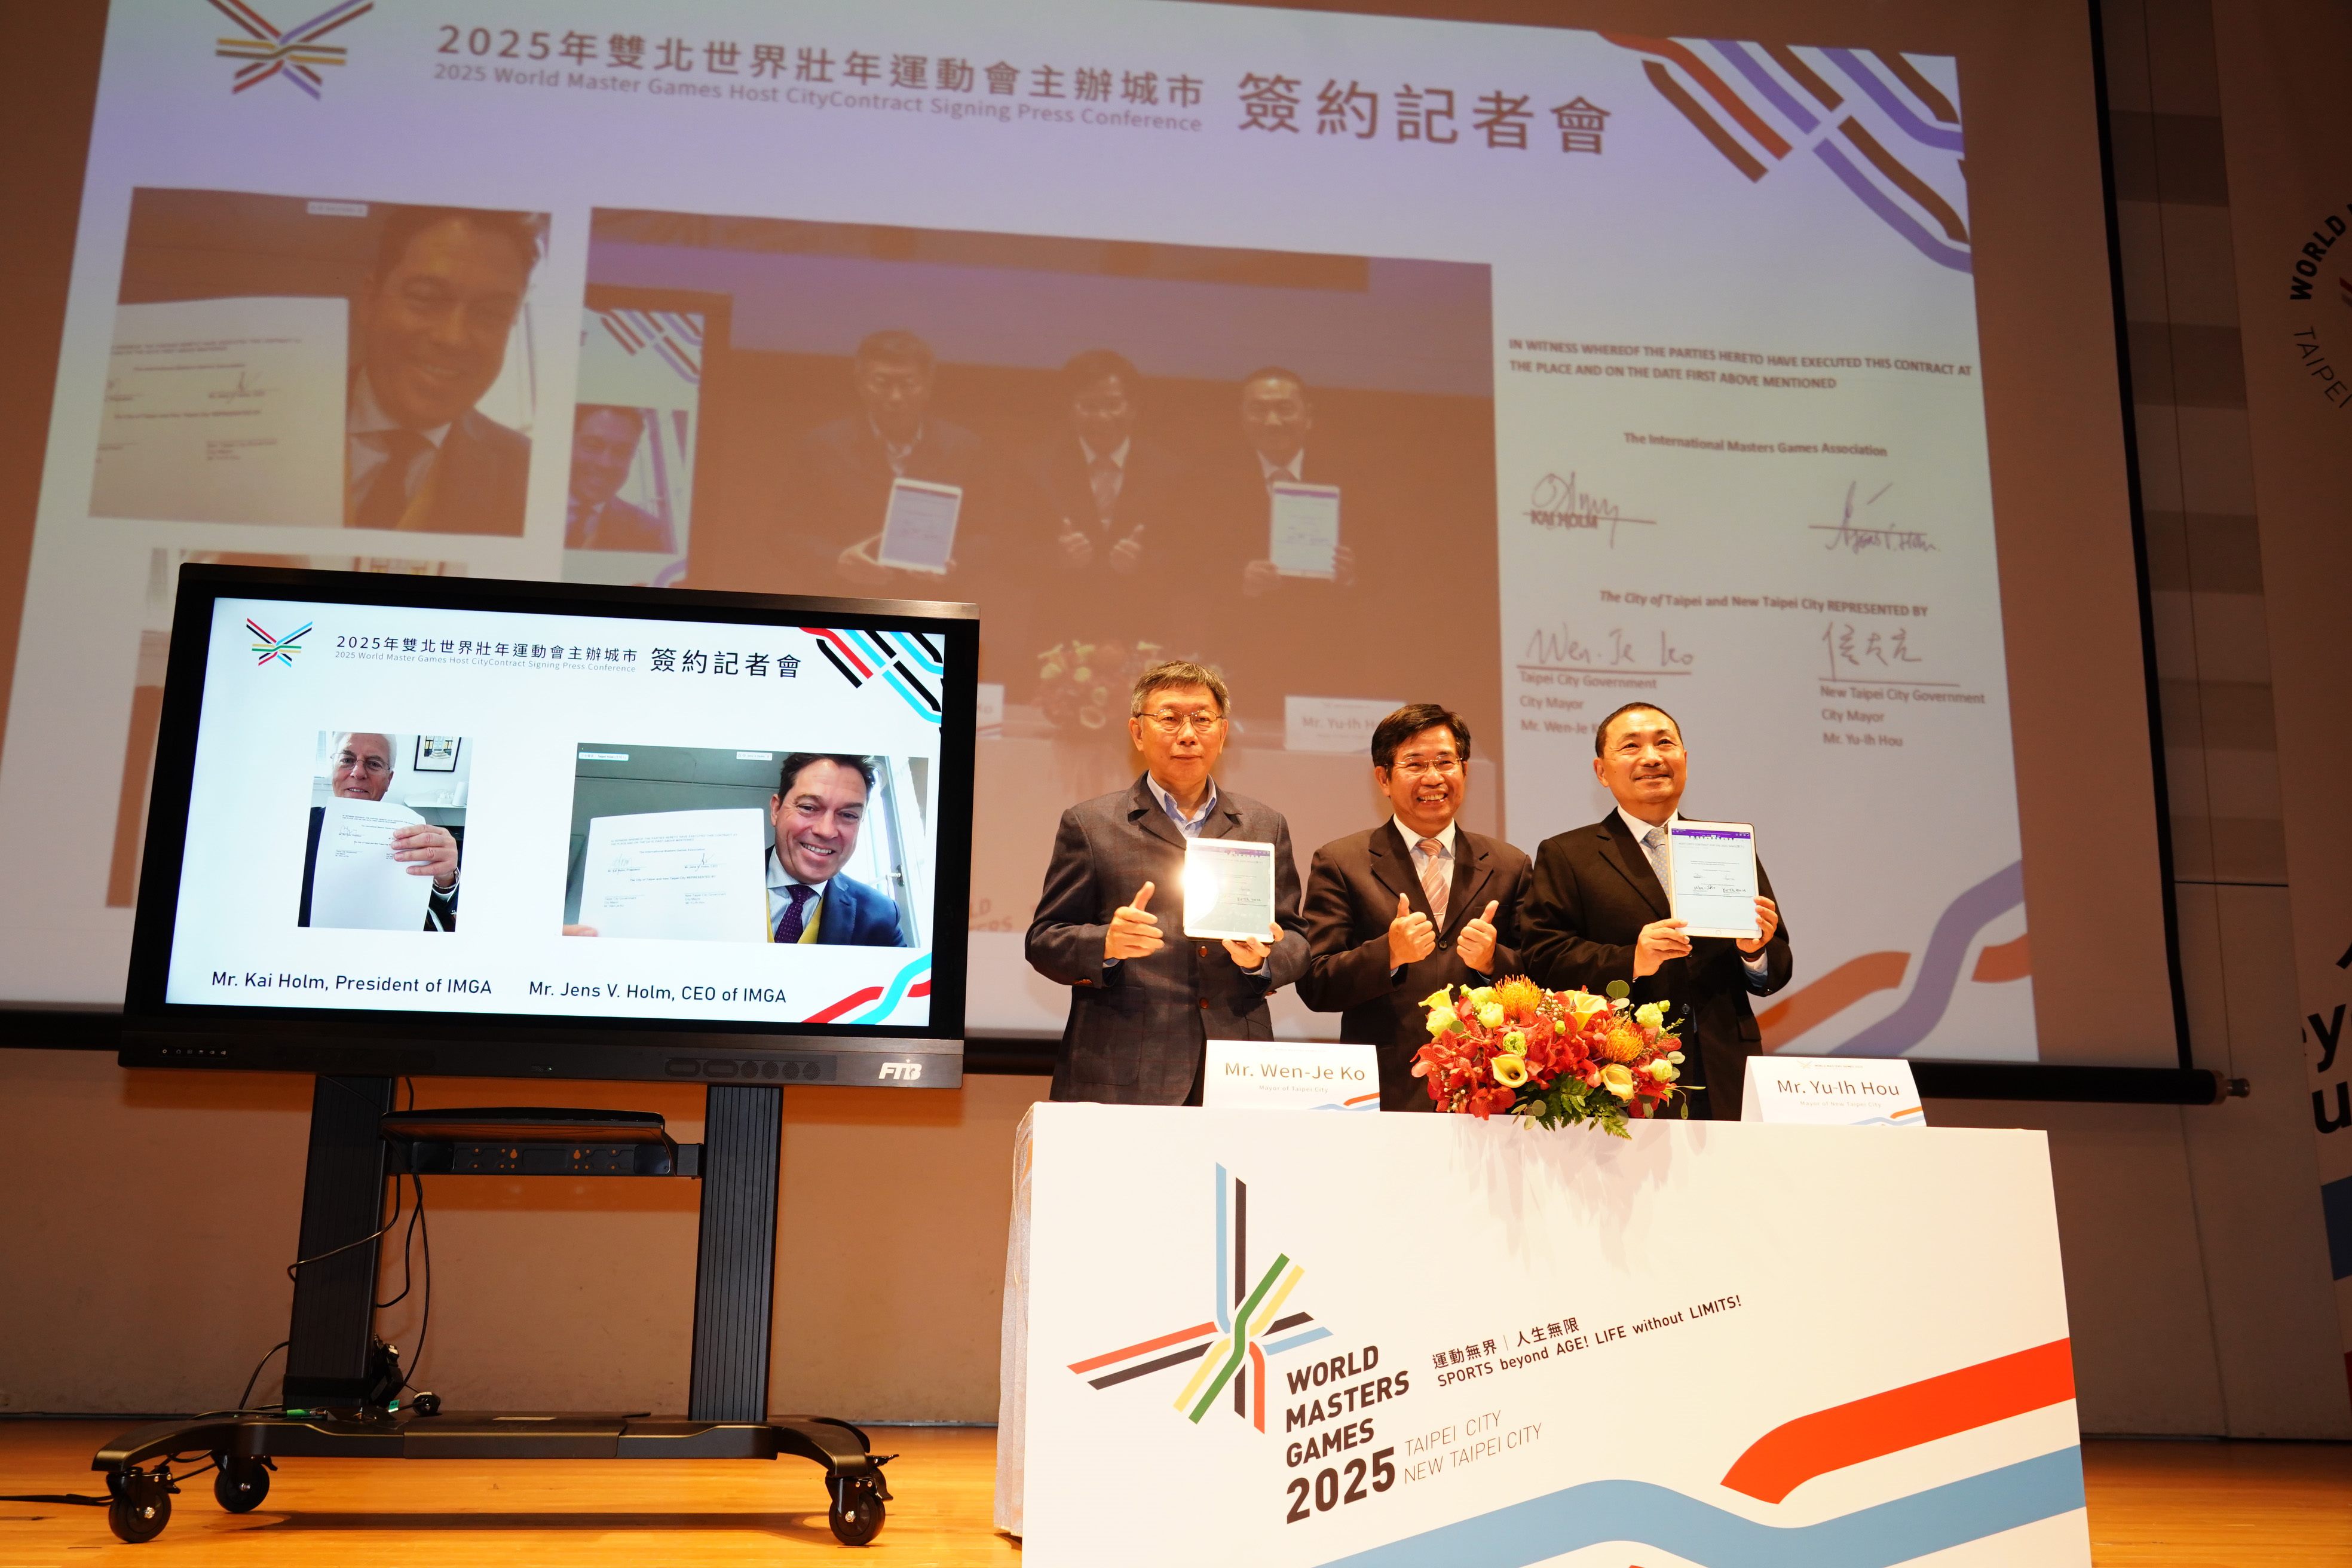 Mayor Ko and Mayor Hou at the signing ceremony for the 2025 World Masters Games